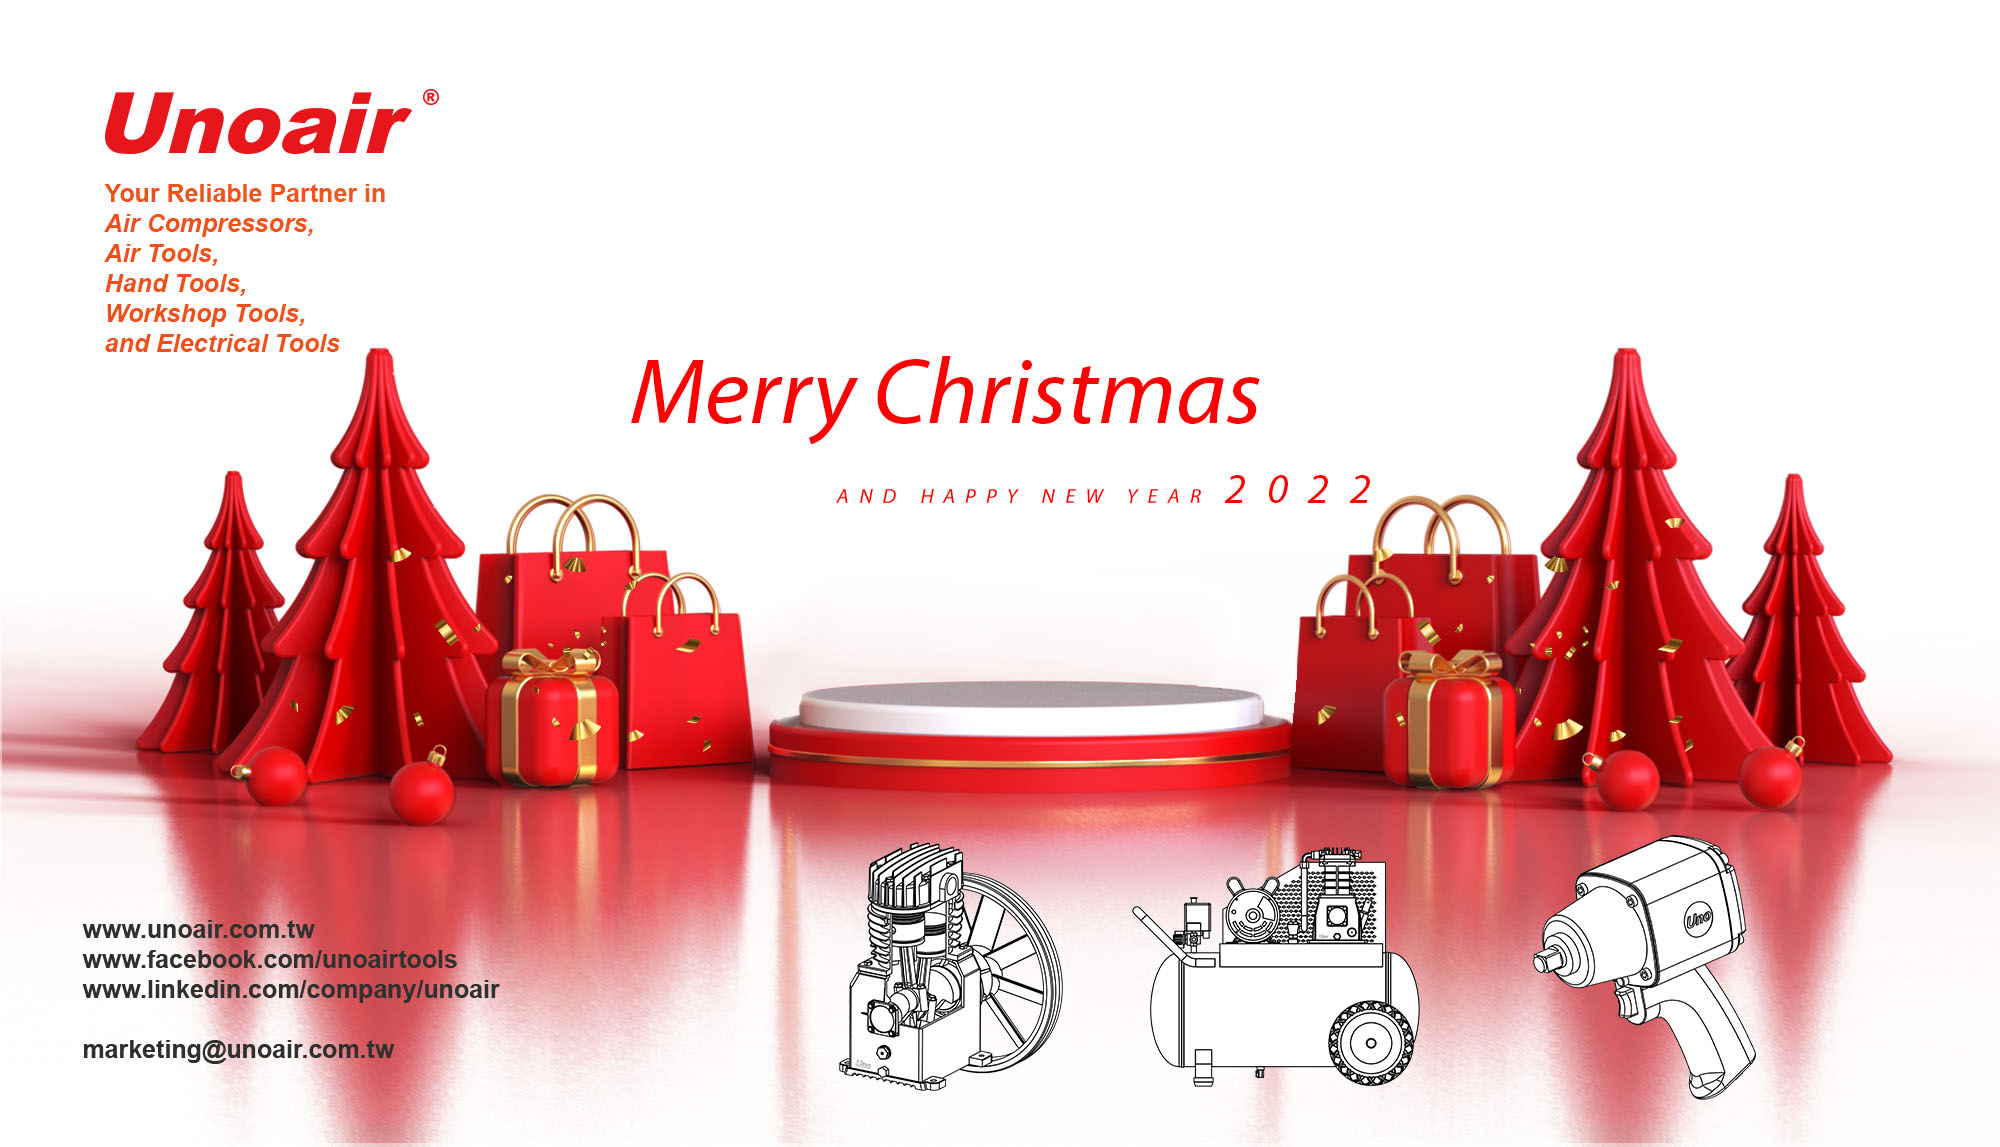 Unoair & the entire crew wish you a Merry Christmas and a Happy New Year